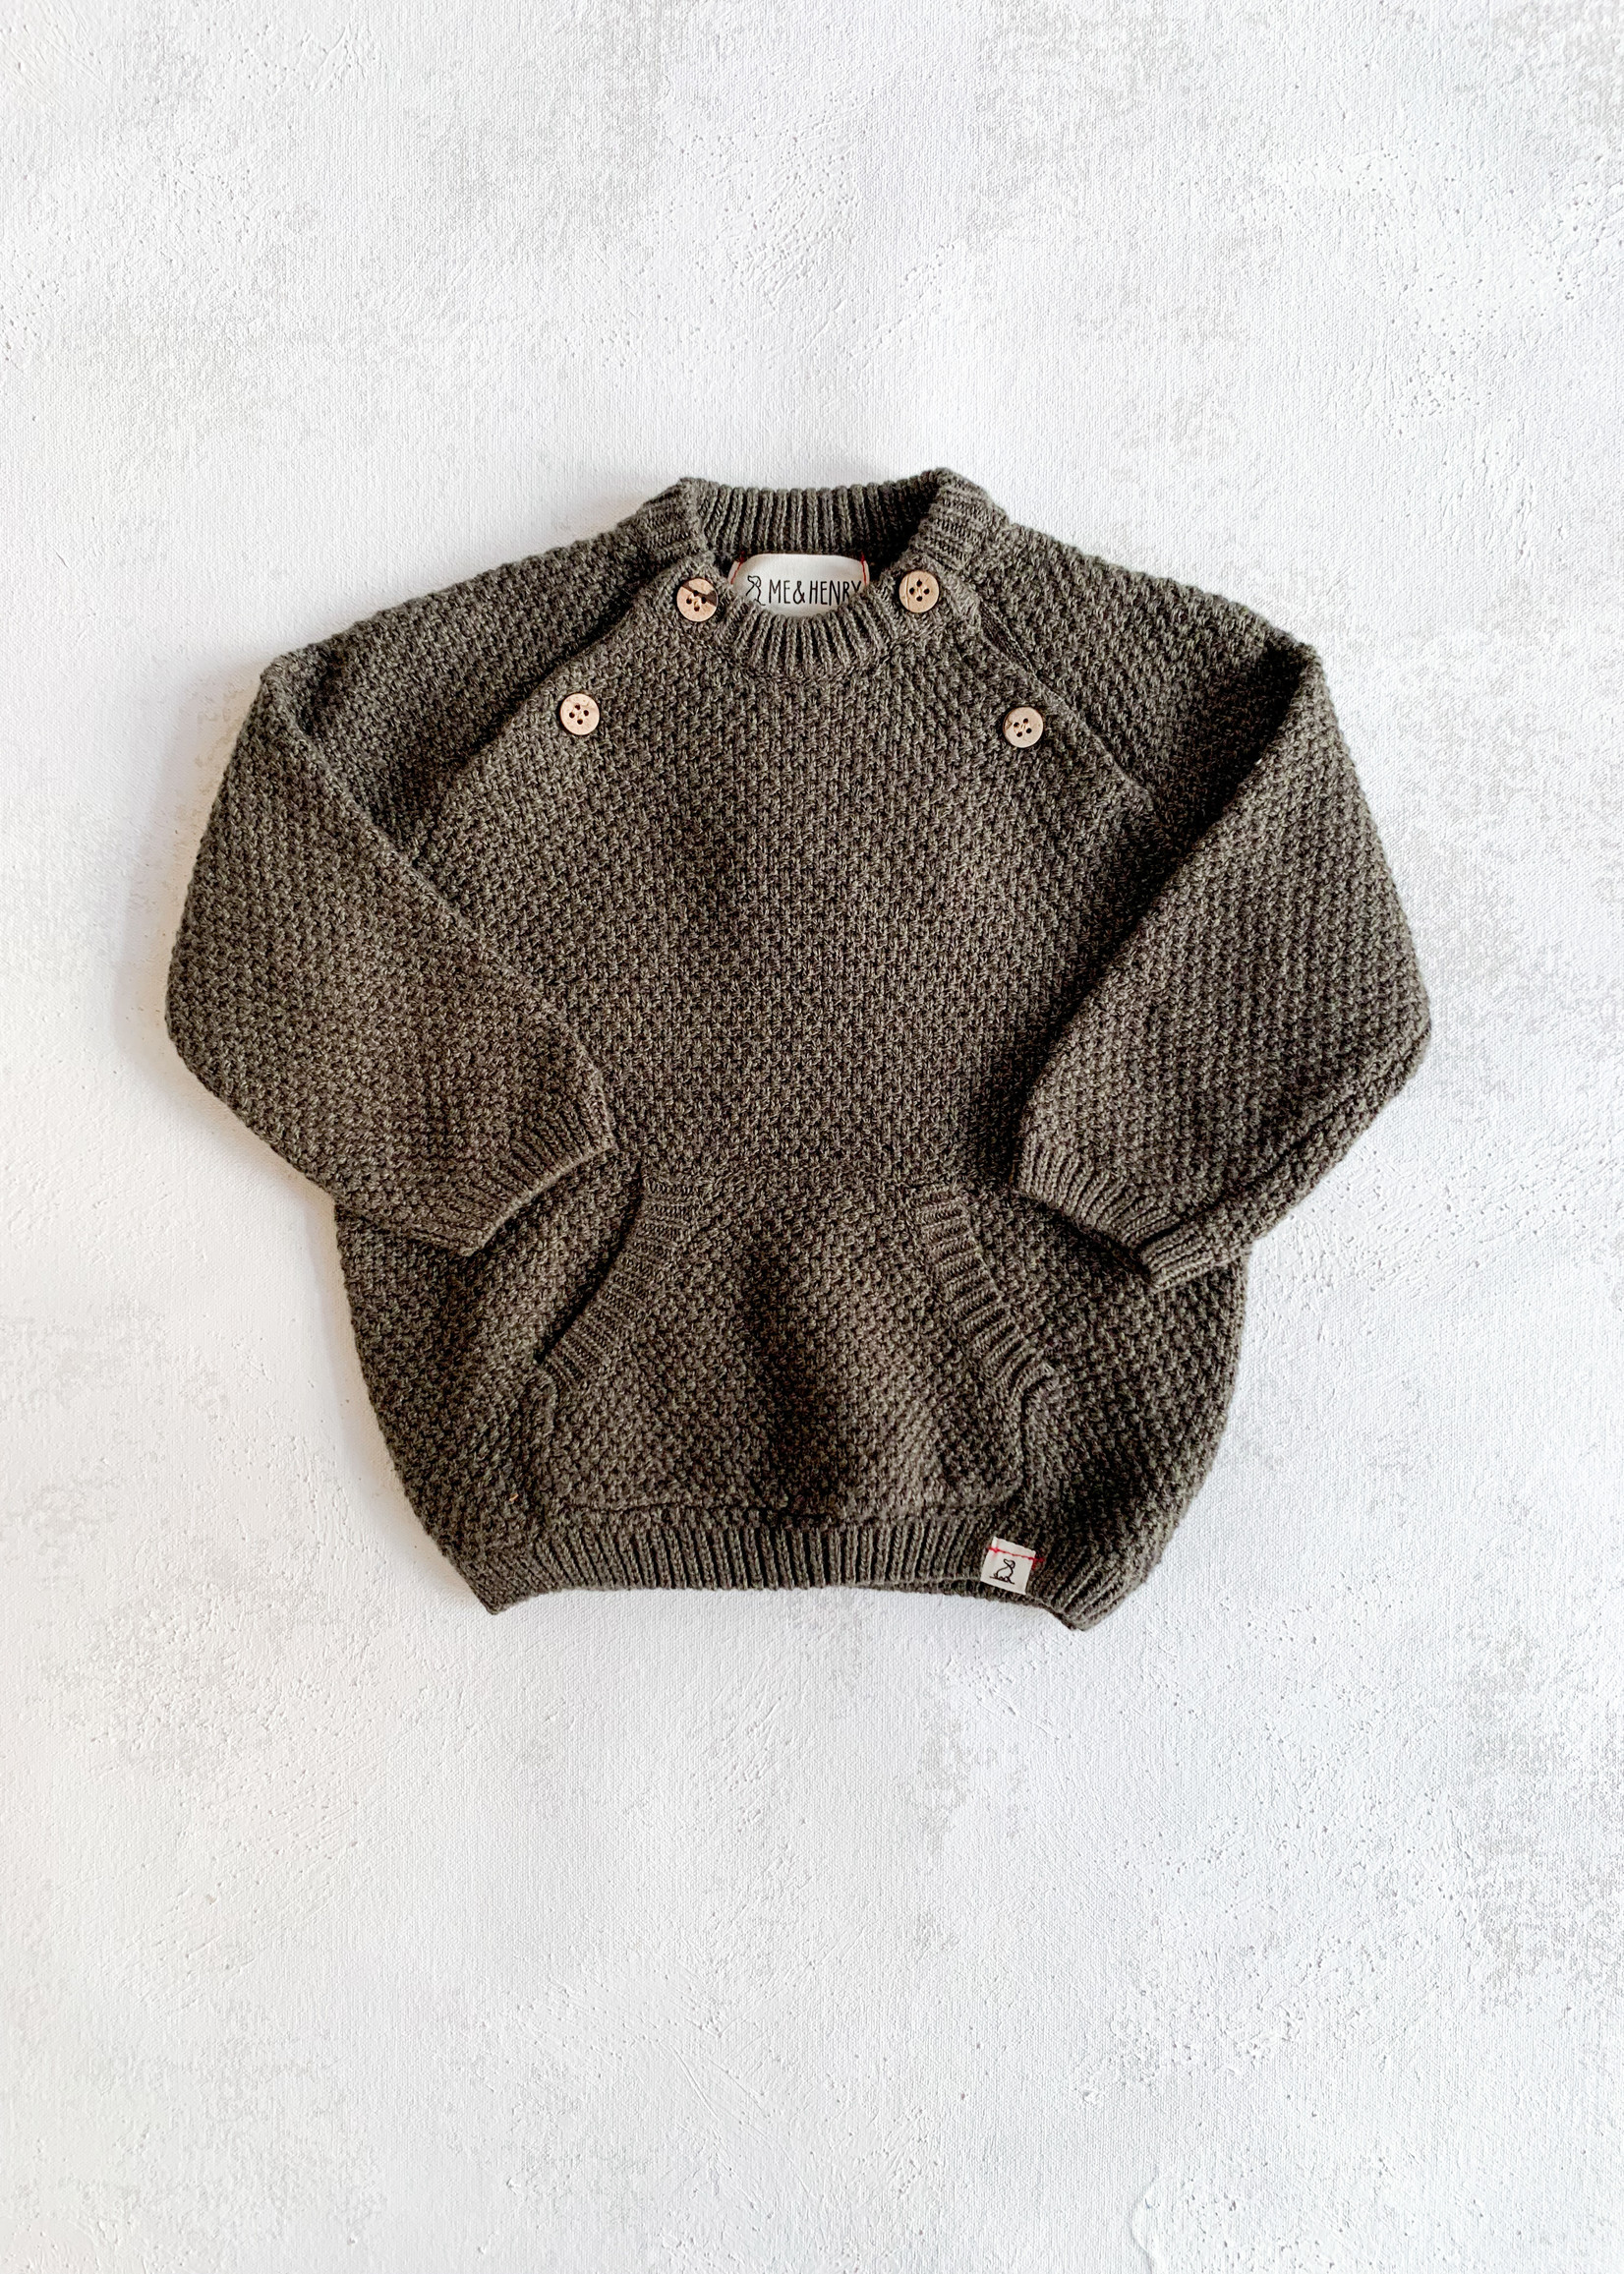 Elitaire Petite Morrison Sweater in Olive